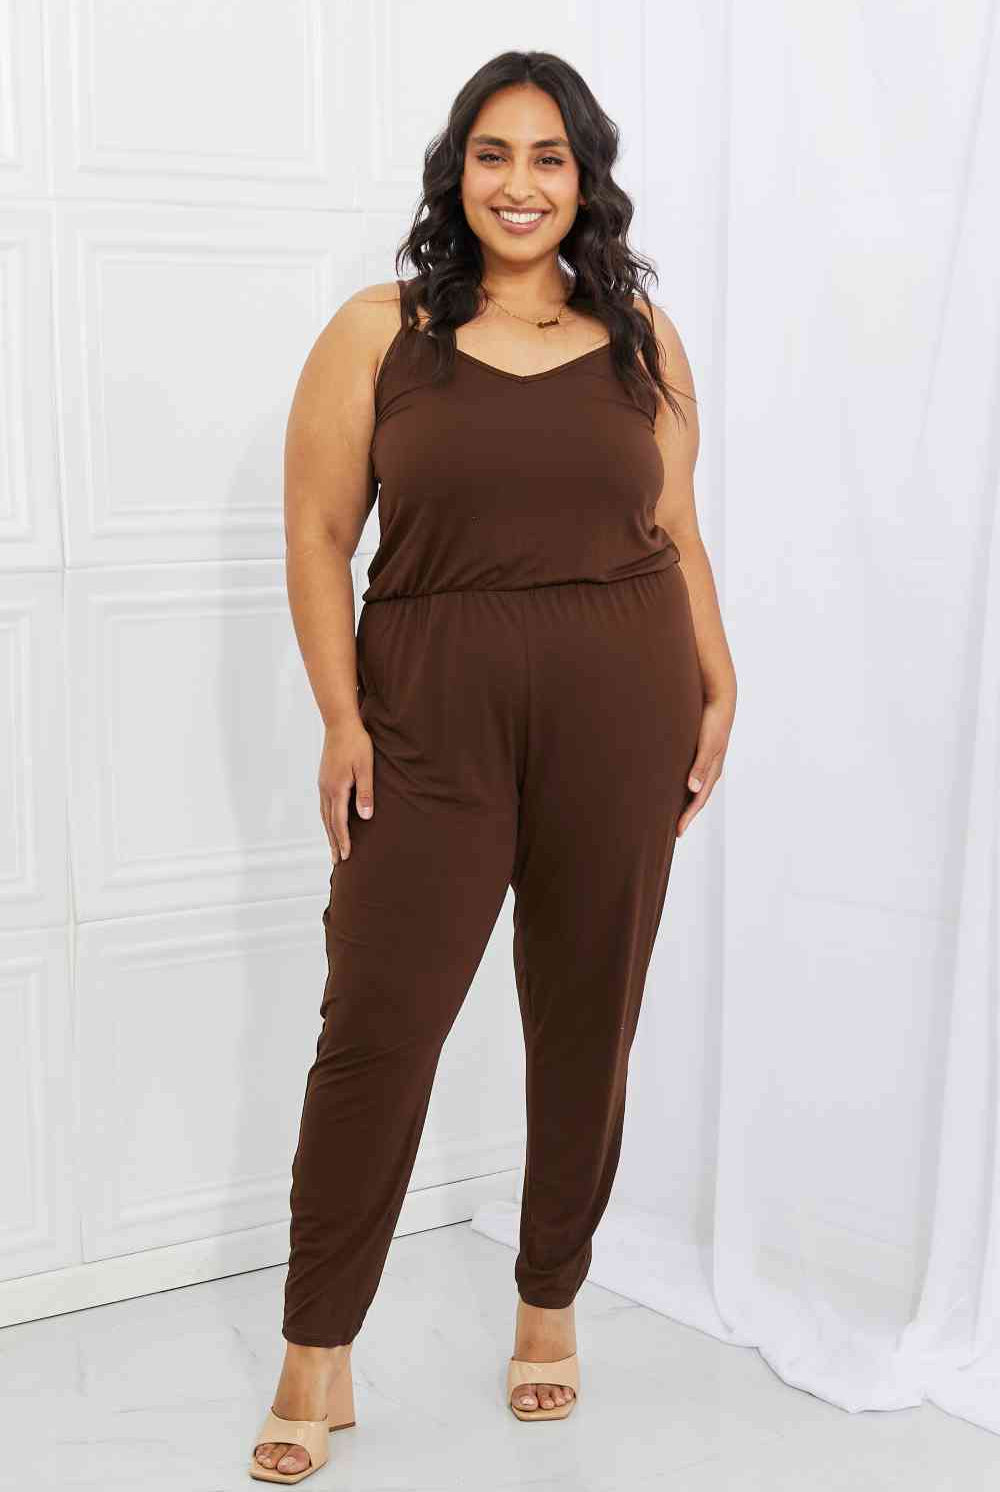 Capella Comfy Casual Full Size Solid Elastic Waistband Jumpsuit in Chocolate - GemThreads Boutique